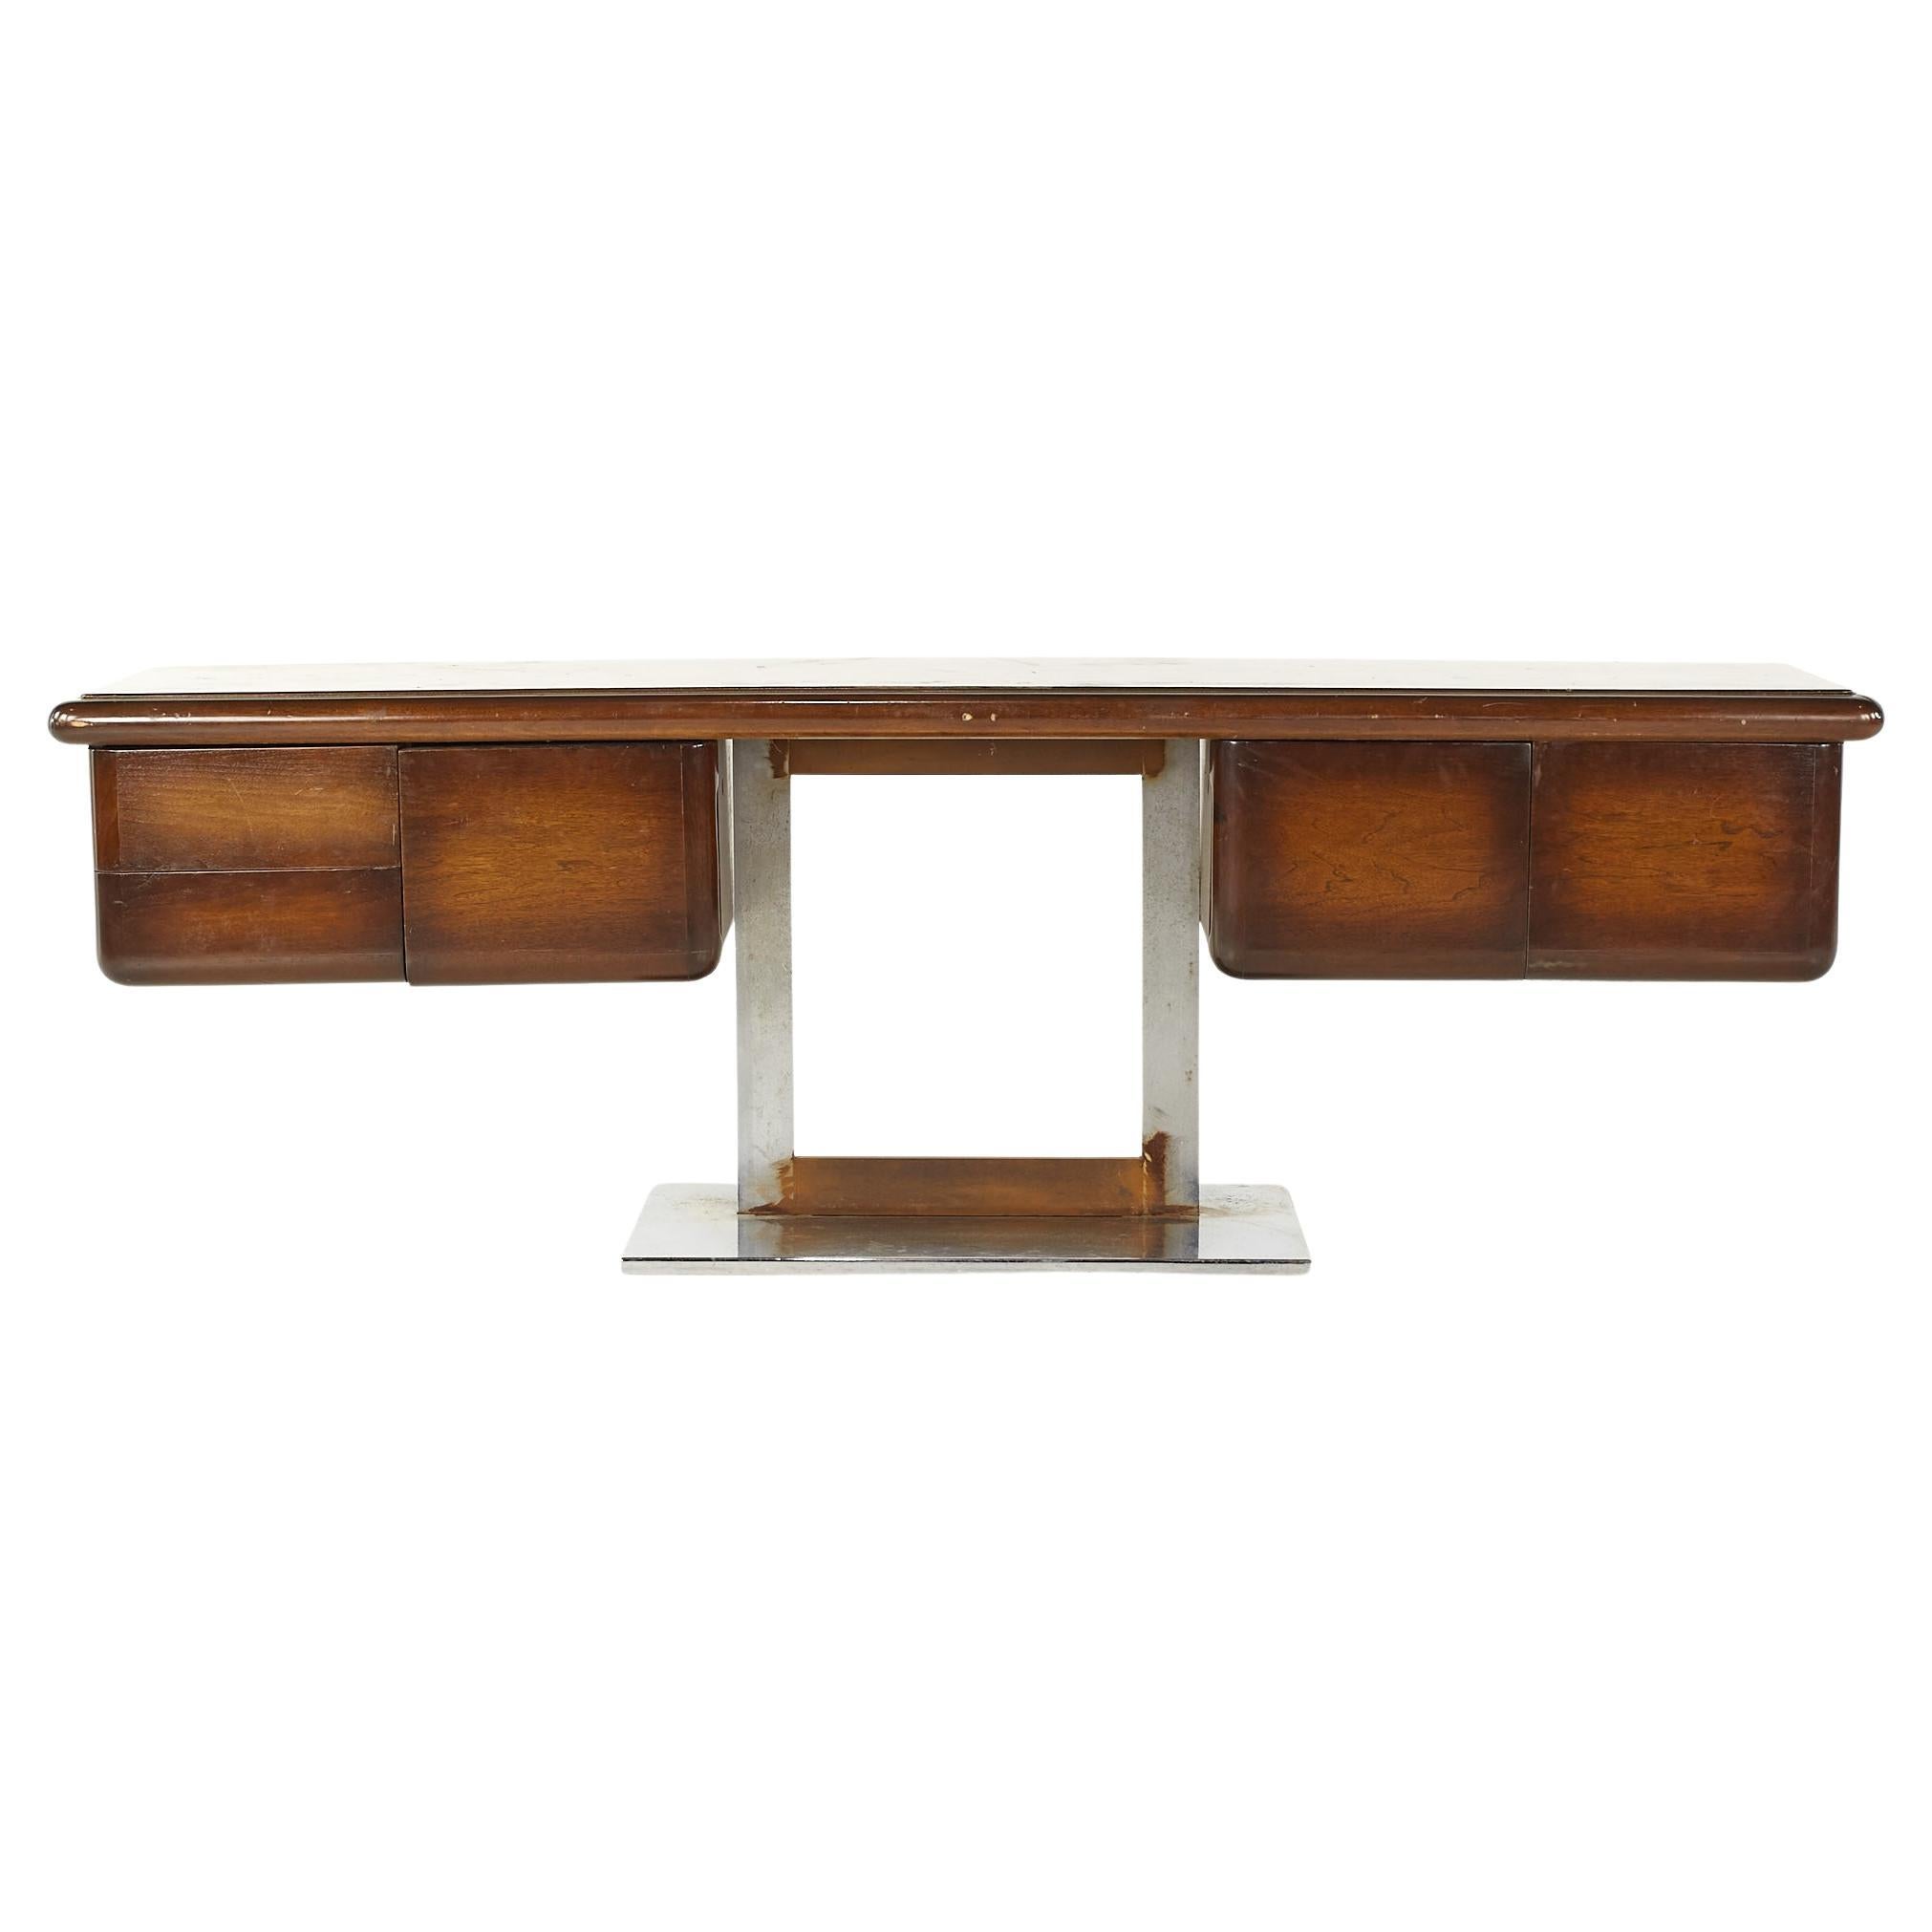 Warren Platner style mid century marble walnut and chrome credenza

This credenza measures: 89.75 wide x 21.75 deep x 29.25 inches high

All pieces of furniture can be had in what we call restored vintage condition. That means the piece is